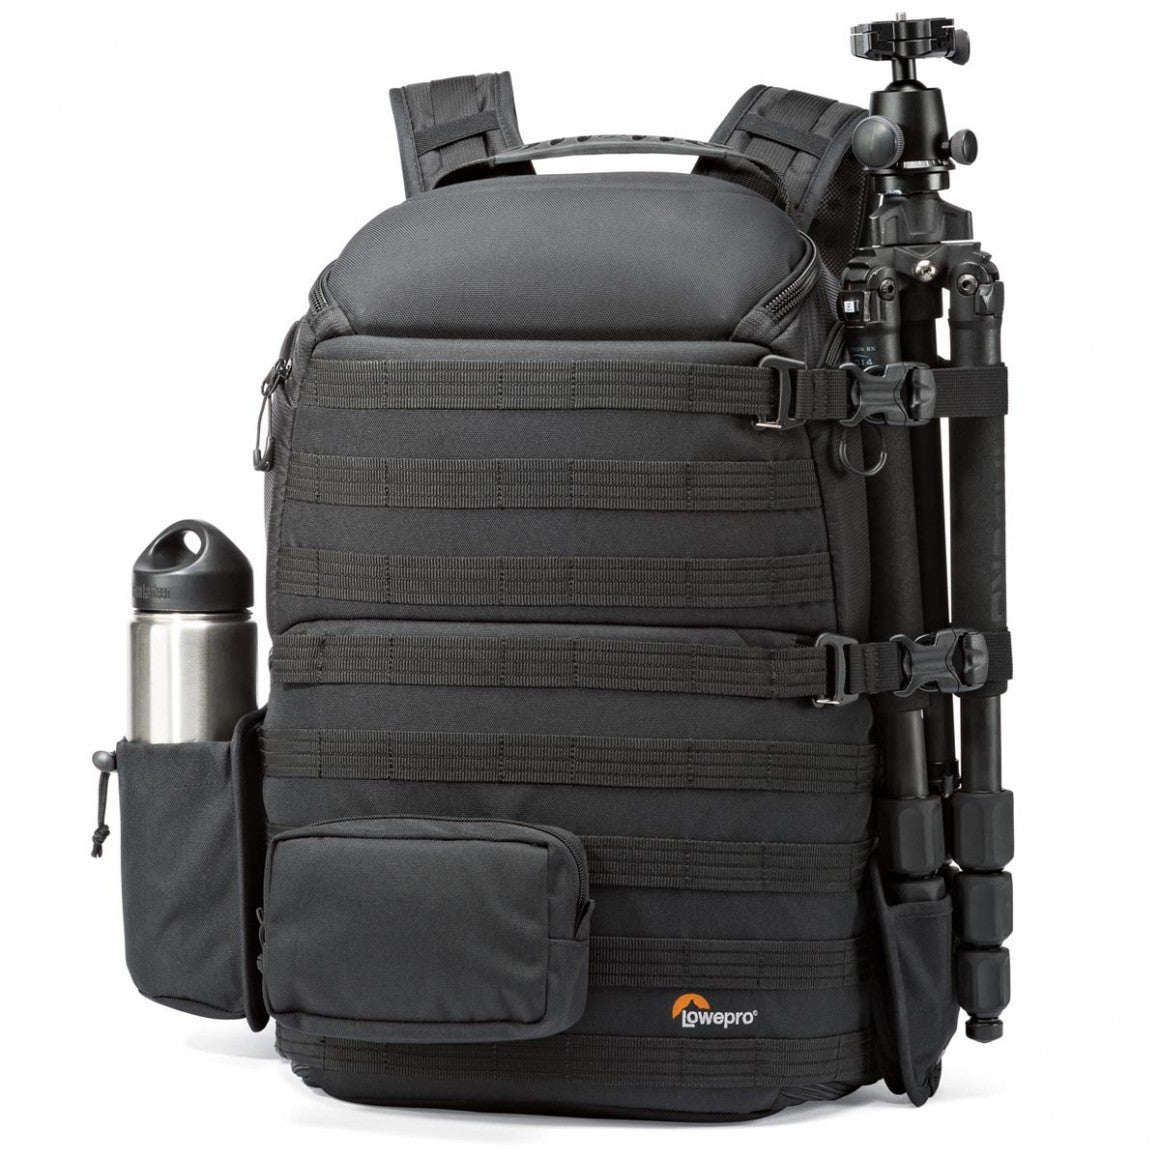 Lowepro Pro Tactic 450 AW Camera Bag, bags backpacks, Lowepro - Pictureline  - 2